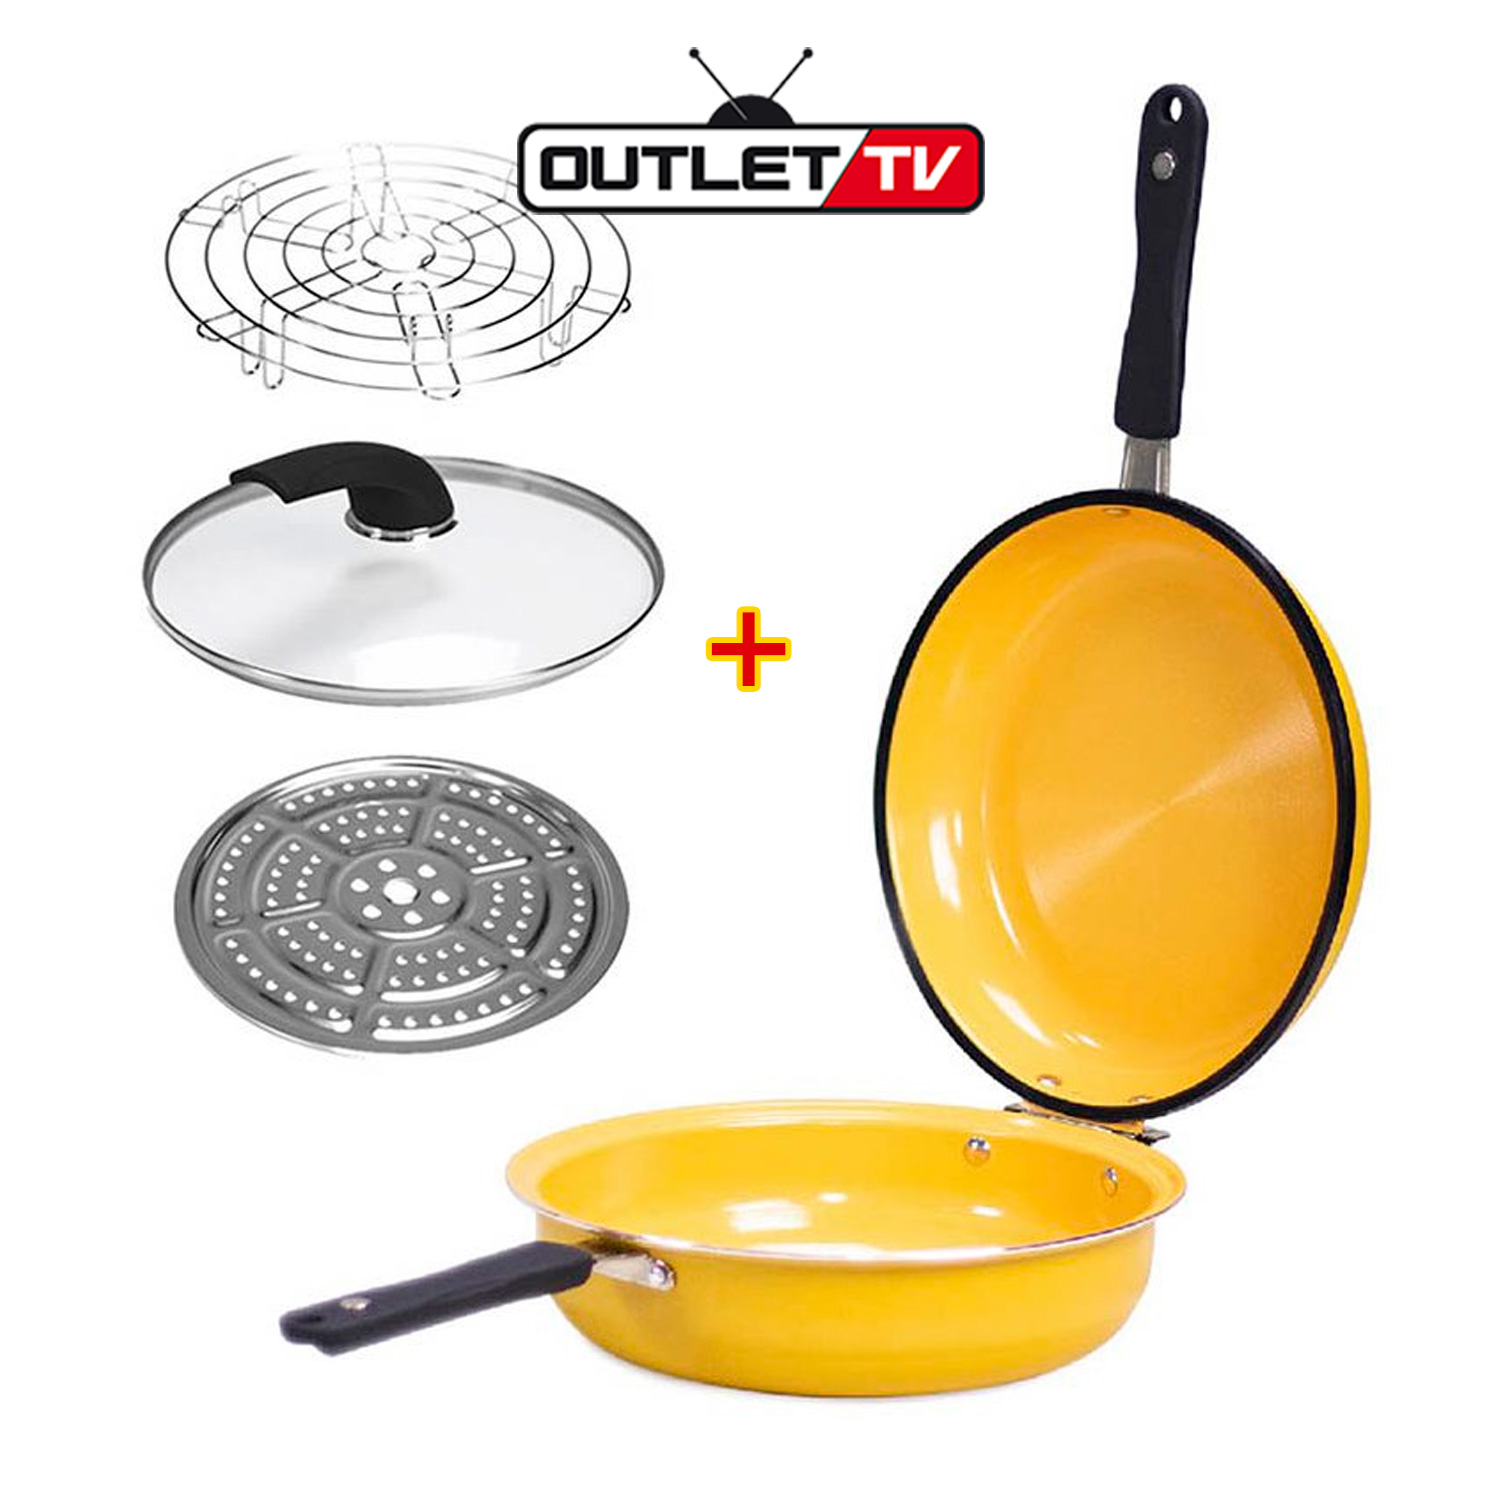 https://outlettv.com.co/wp-content/uploads/Sart%C3%A9n-Doble-Deluxe-Multifuncional-Antiadherente-Amarillo-Outlet-TV-Colombia_01.jpg